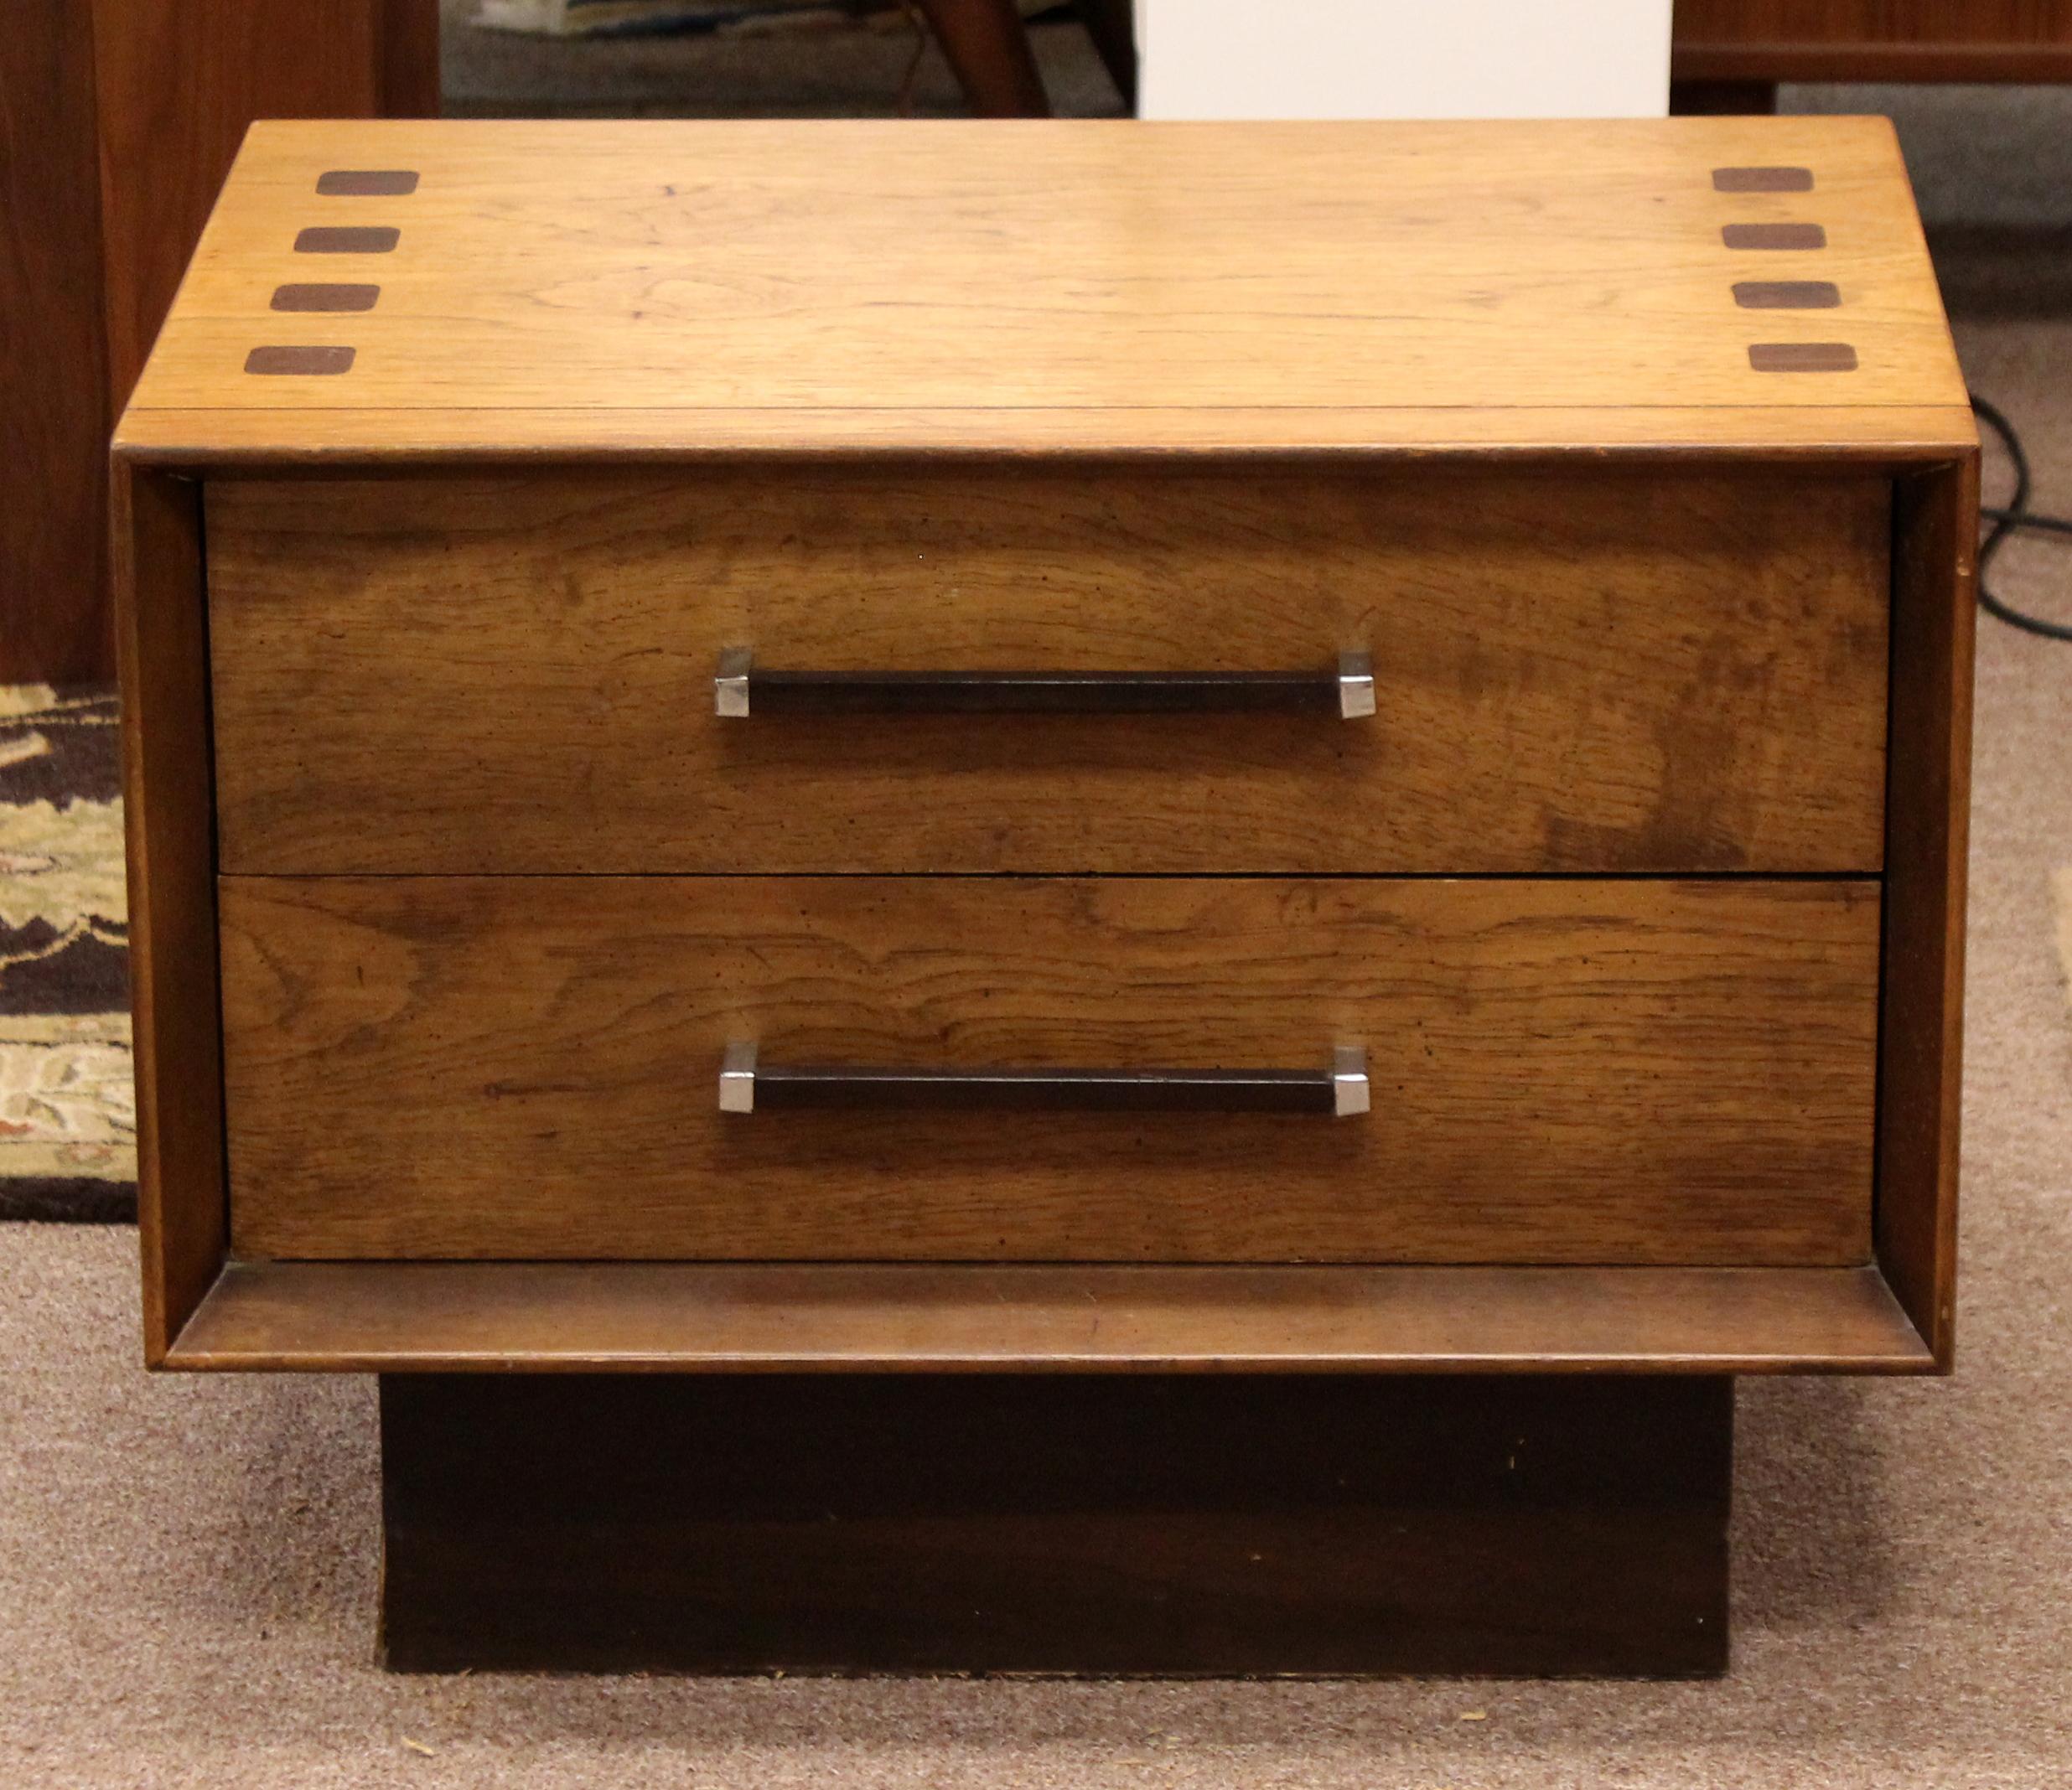 For your consideration is a beautiful, ribbed walnut and rosewood nightstand, by Lane Altavista, circa 1960s. In very good vintage condition. The dimensions are 26